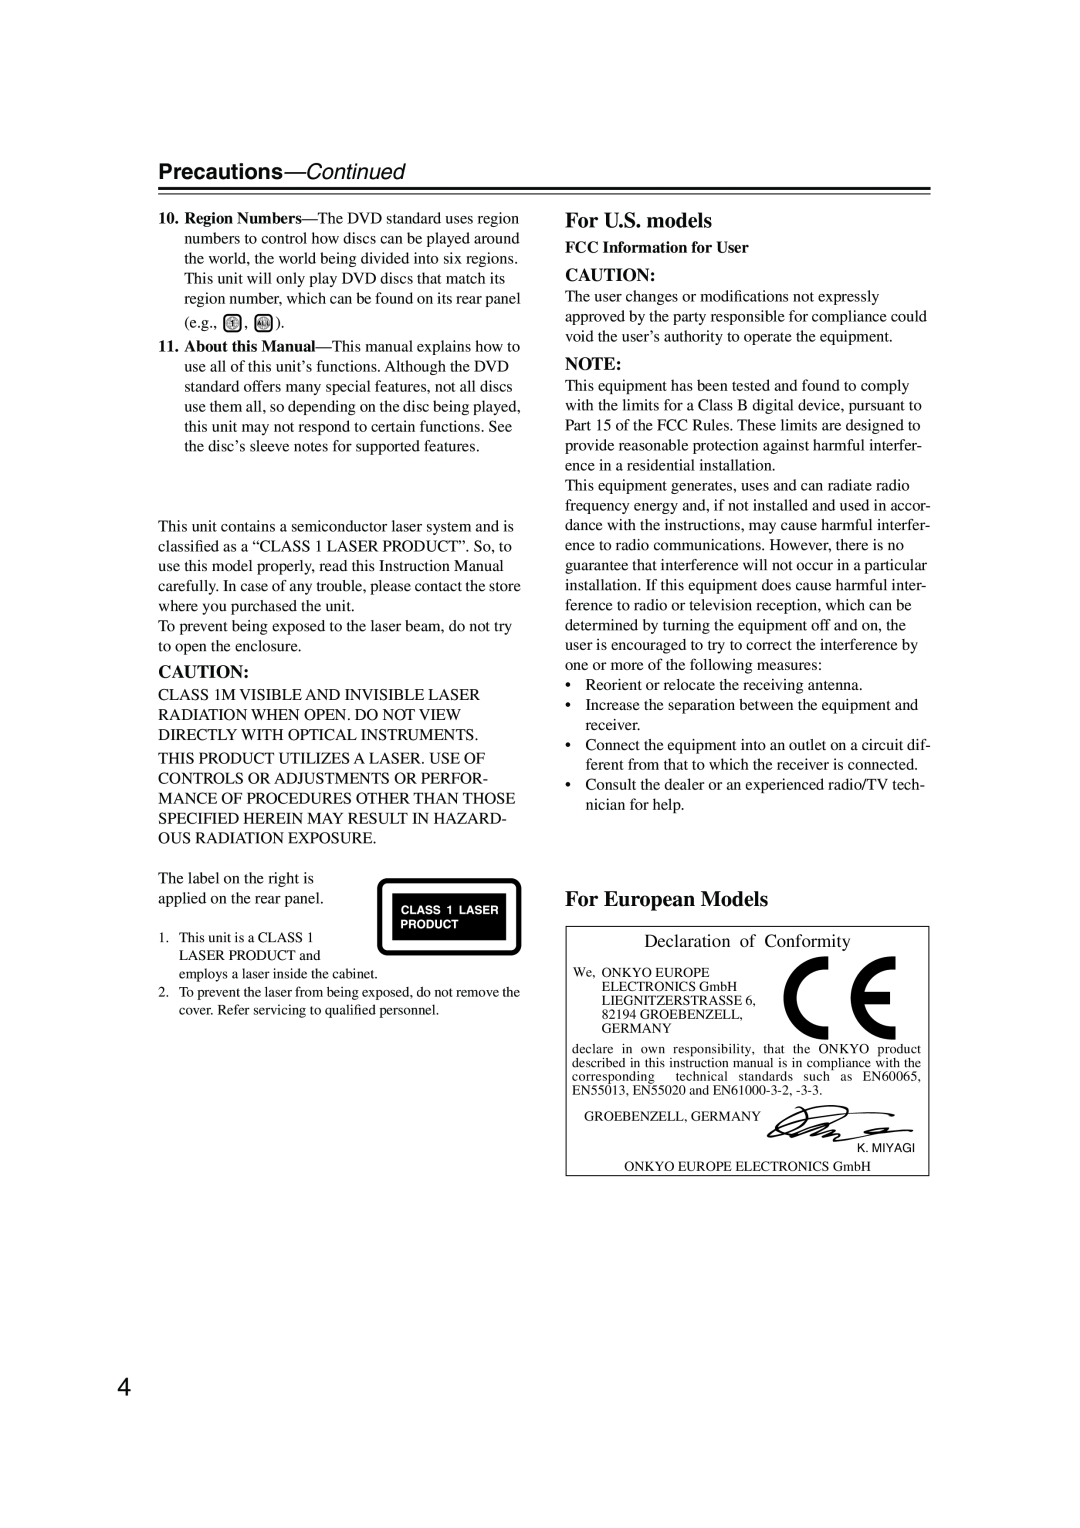 Onkyo DV-SP504E instruction manual Precautions-Continued, For U.S. models, For European Models, FCC Information for User 